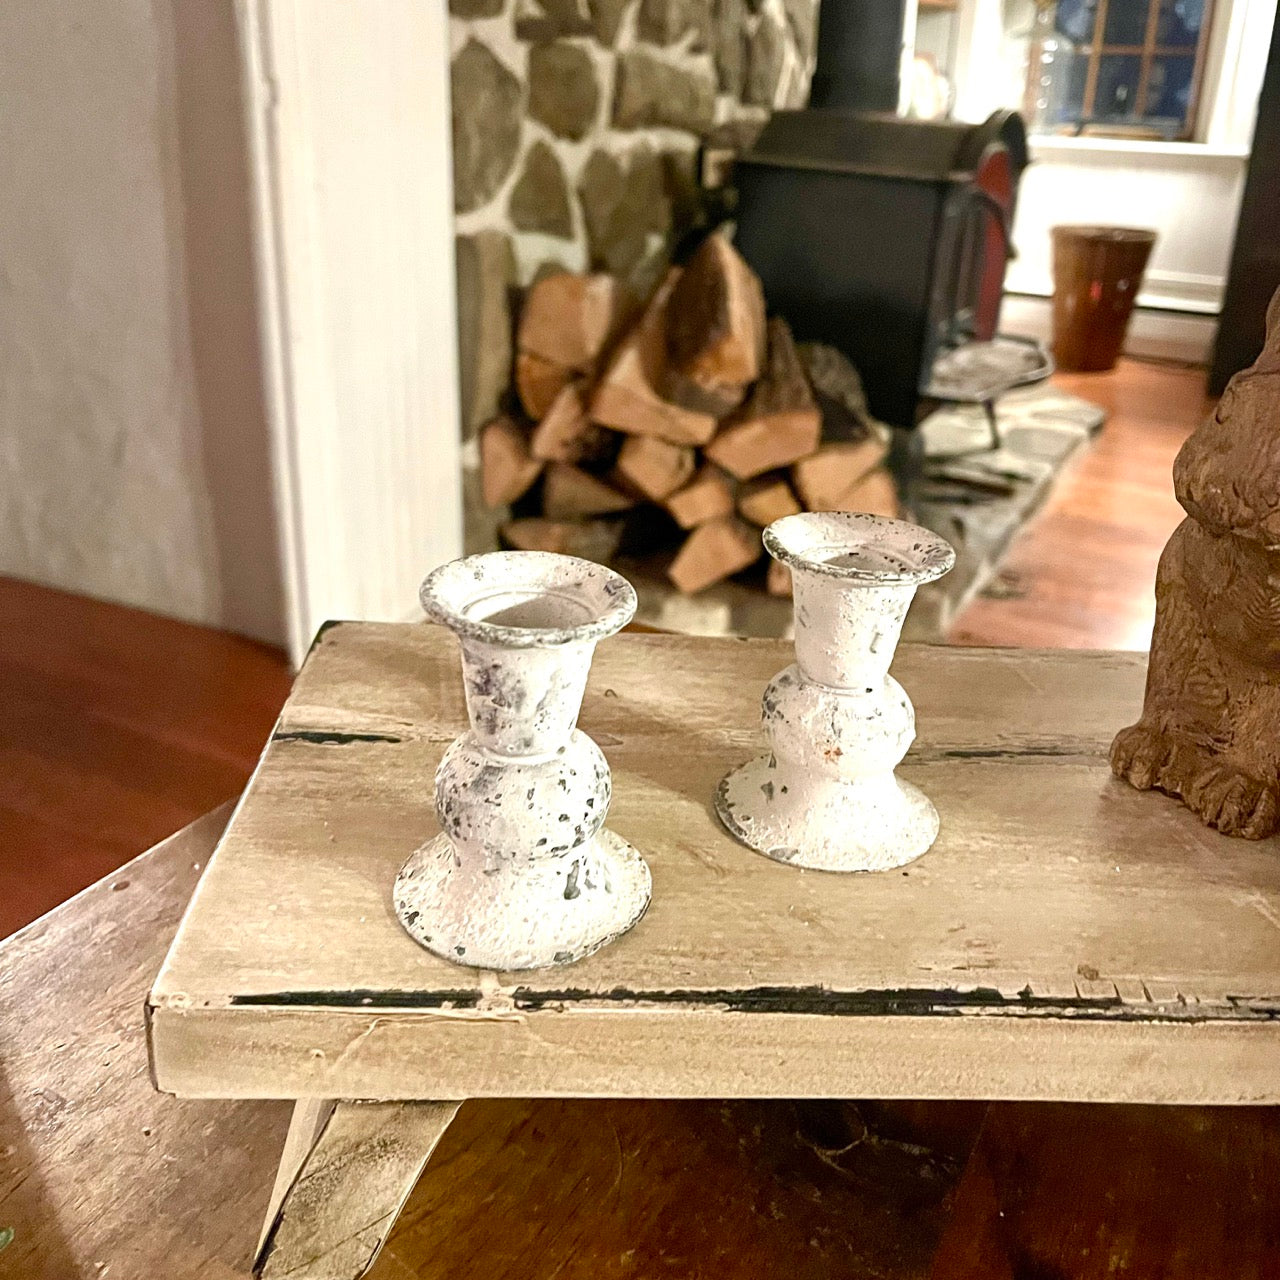 Rustic White Candle Holders | Set of 2 Country, Country Decor, Country Home, Country Kitchen Decor, Everyday, Farmhouse Decor, Farmhouse Decorating, Home Accents, New, Primitive, Primitive Decor, Primitive Decorating, Spring Rustic White Candle Holders | Set of 2 Country, Country Decor, Country Home, Country Kitchen Decor, Everyday, Farmhouse Decor, Farmhouse Decorating, Home Accents, New, Primitive, Primitive Decor, Primitive Decorating, Spring 